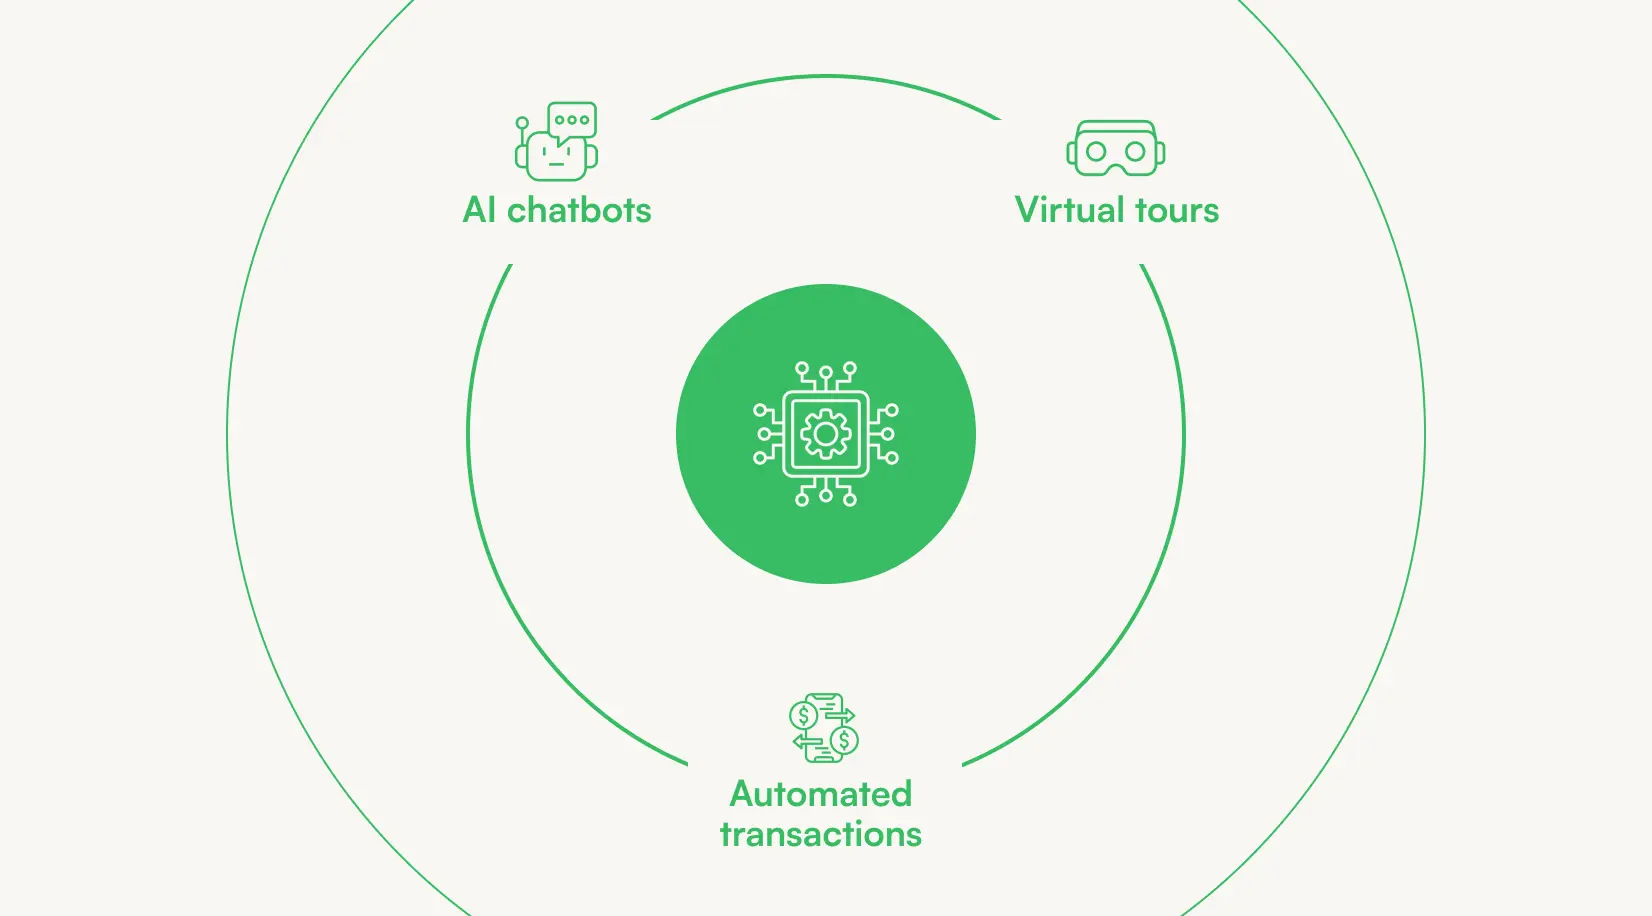 Real estate digitalization: AI Chatbots, virtual tours and automated transactions